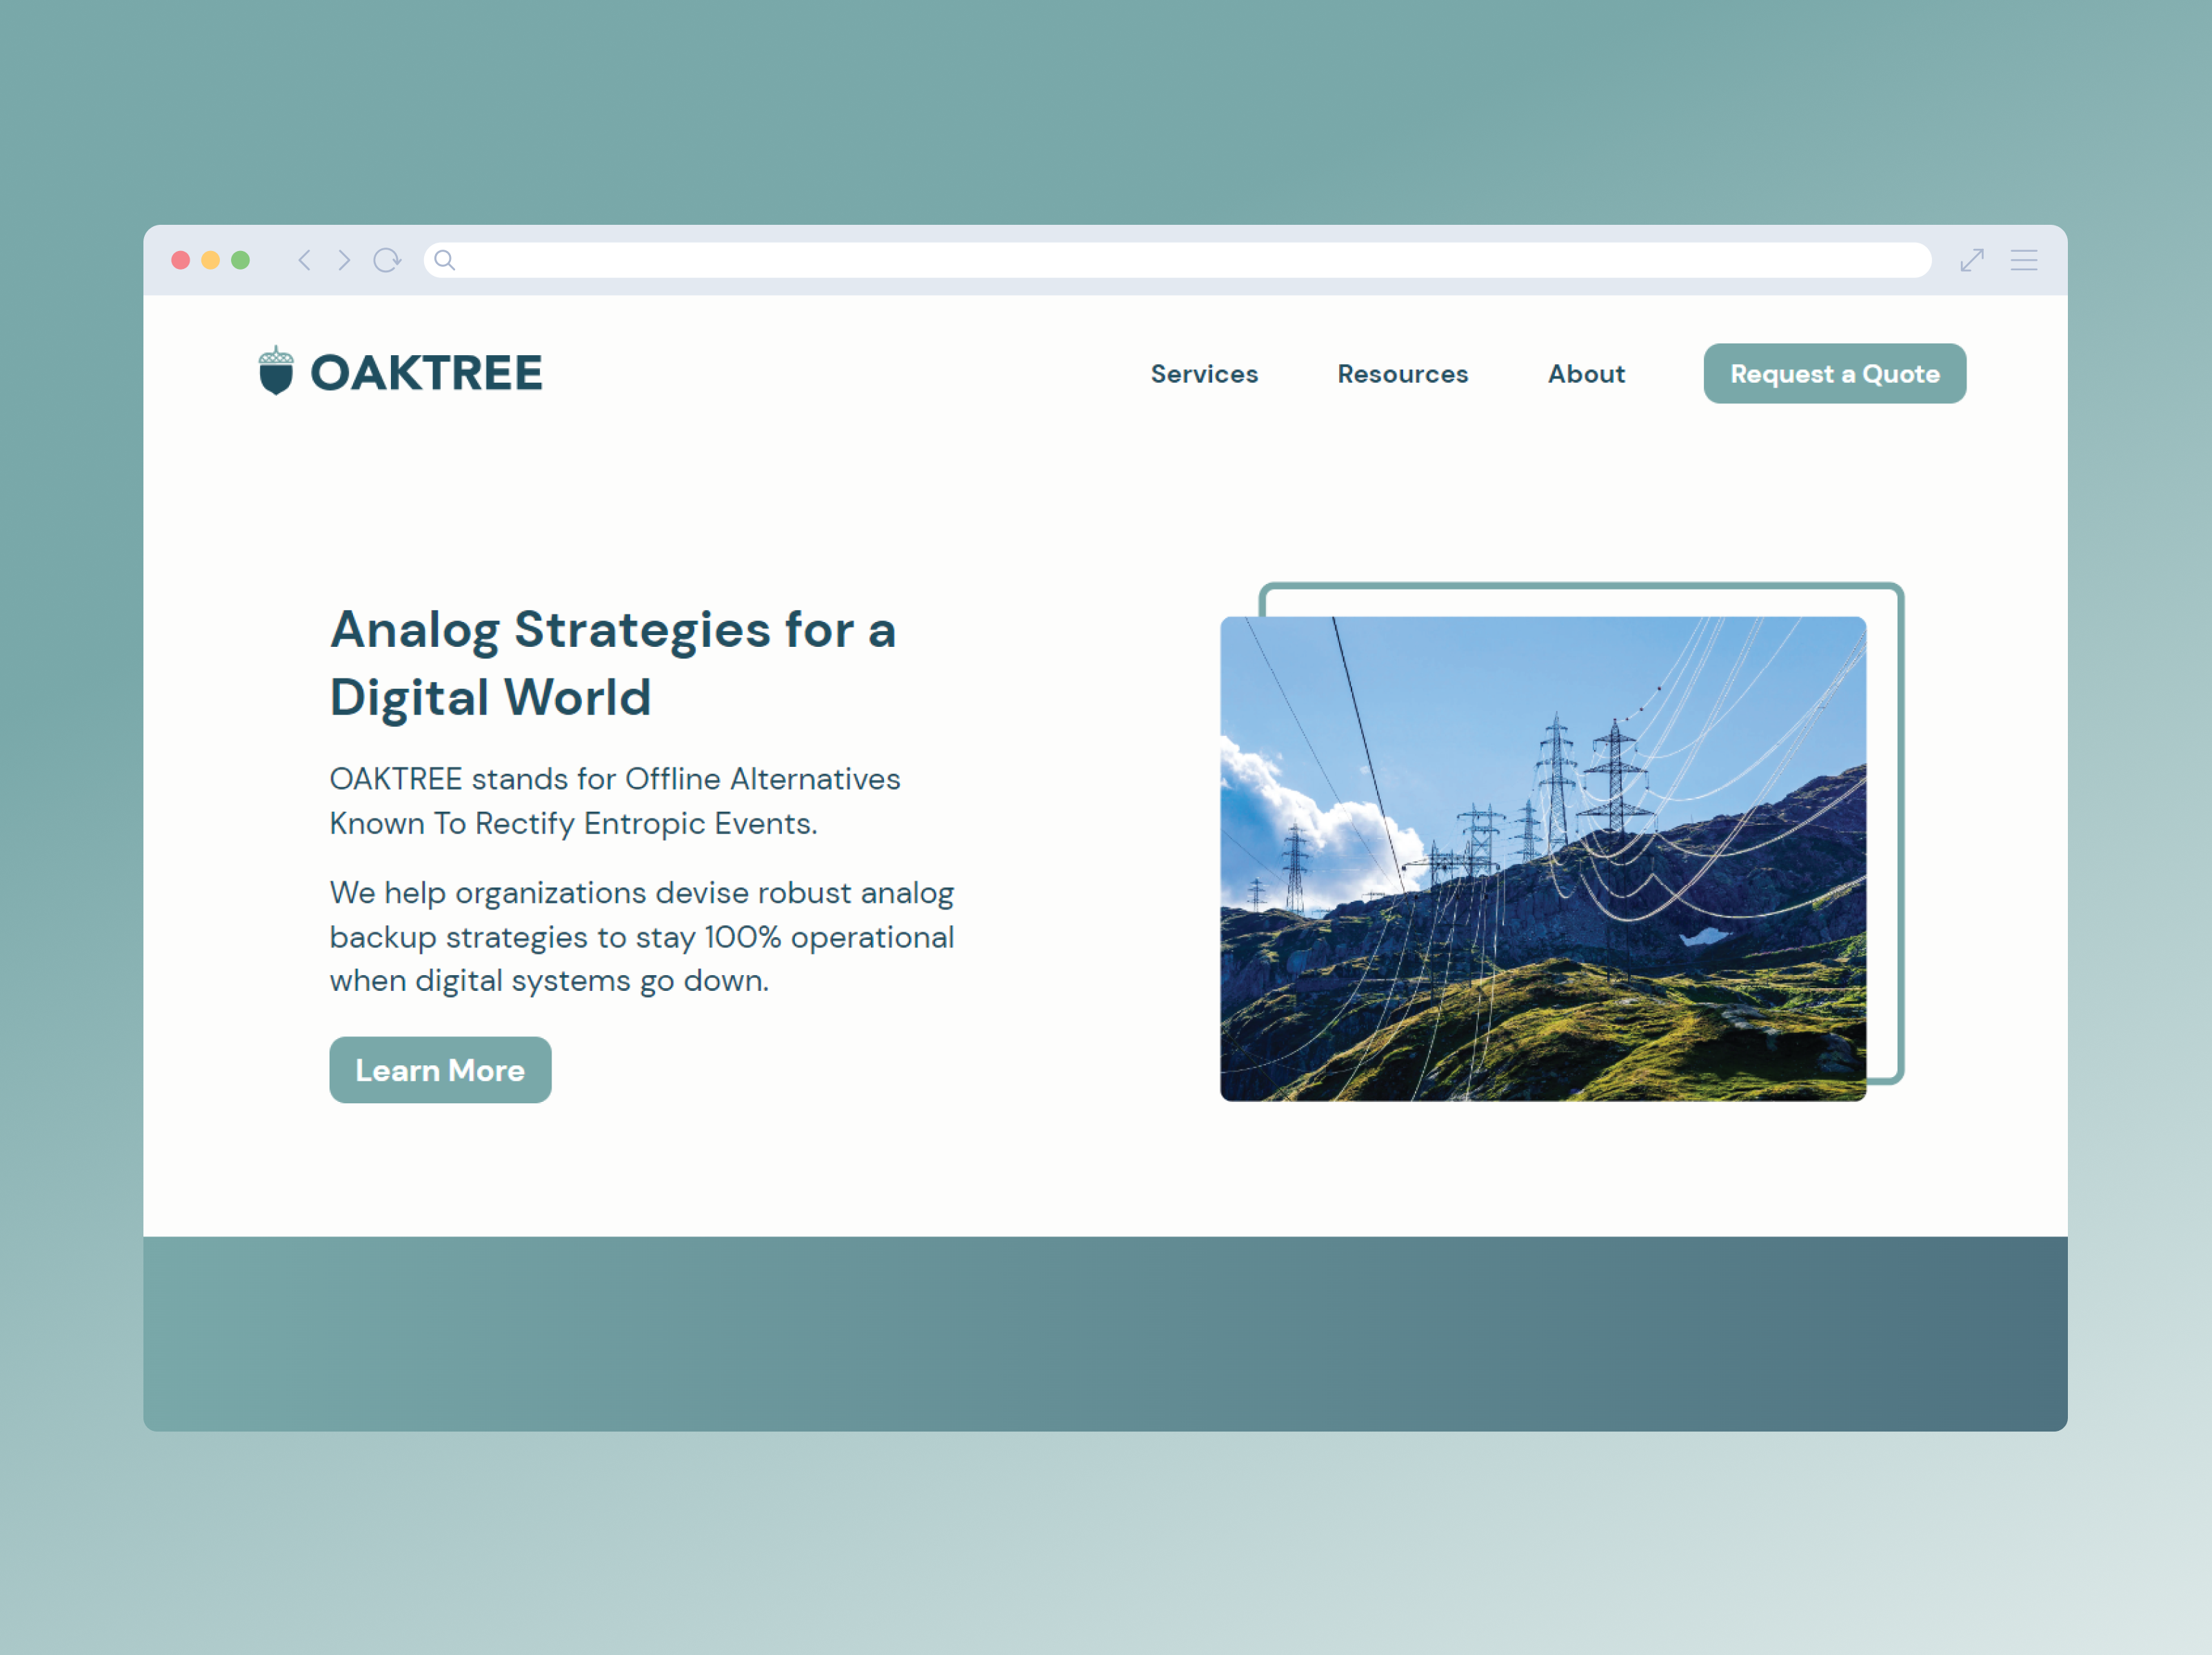 A preview browser image of the website of a cybersecurity consulting company called OAKTREE.